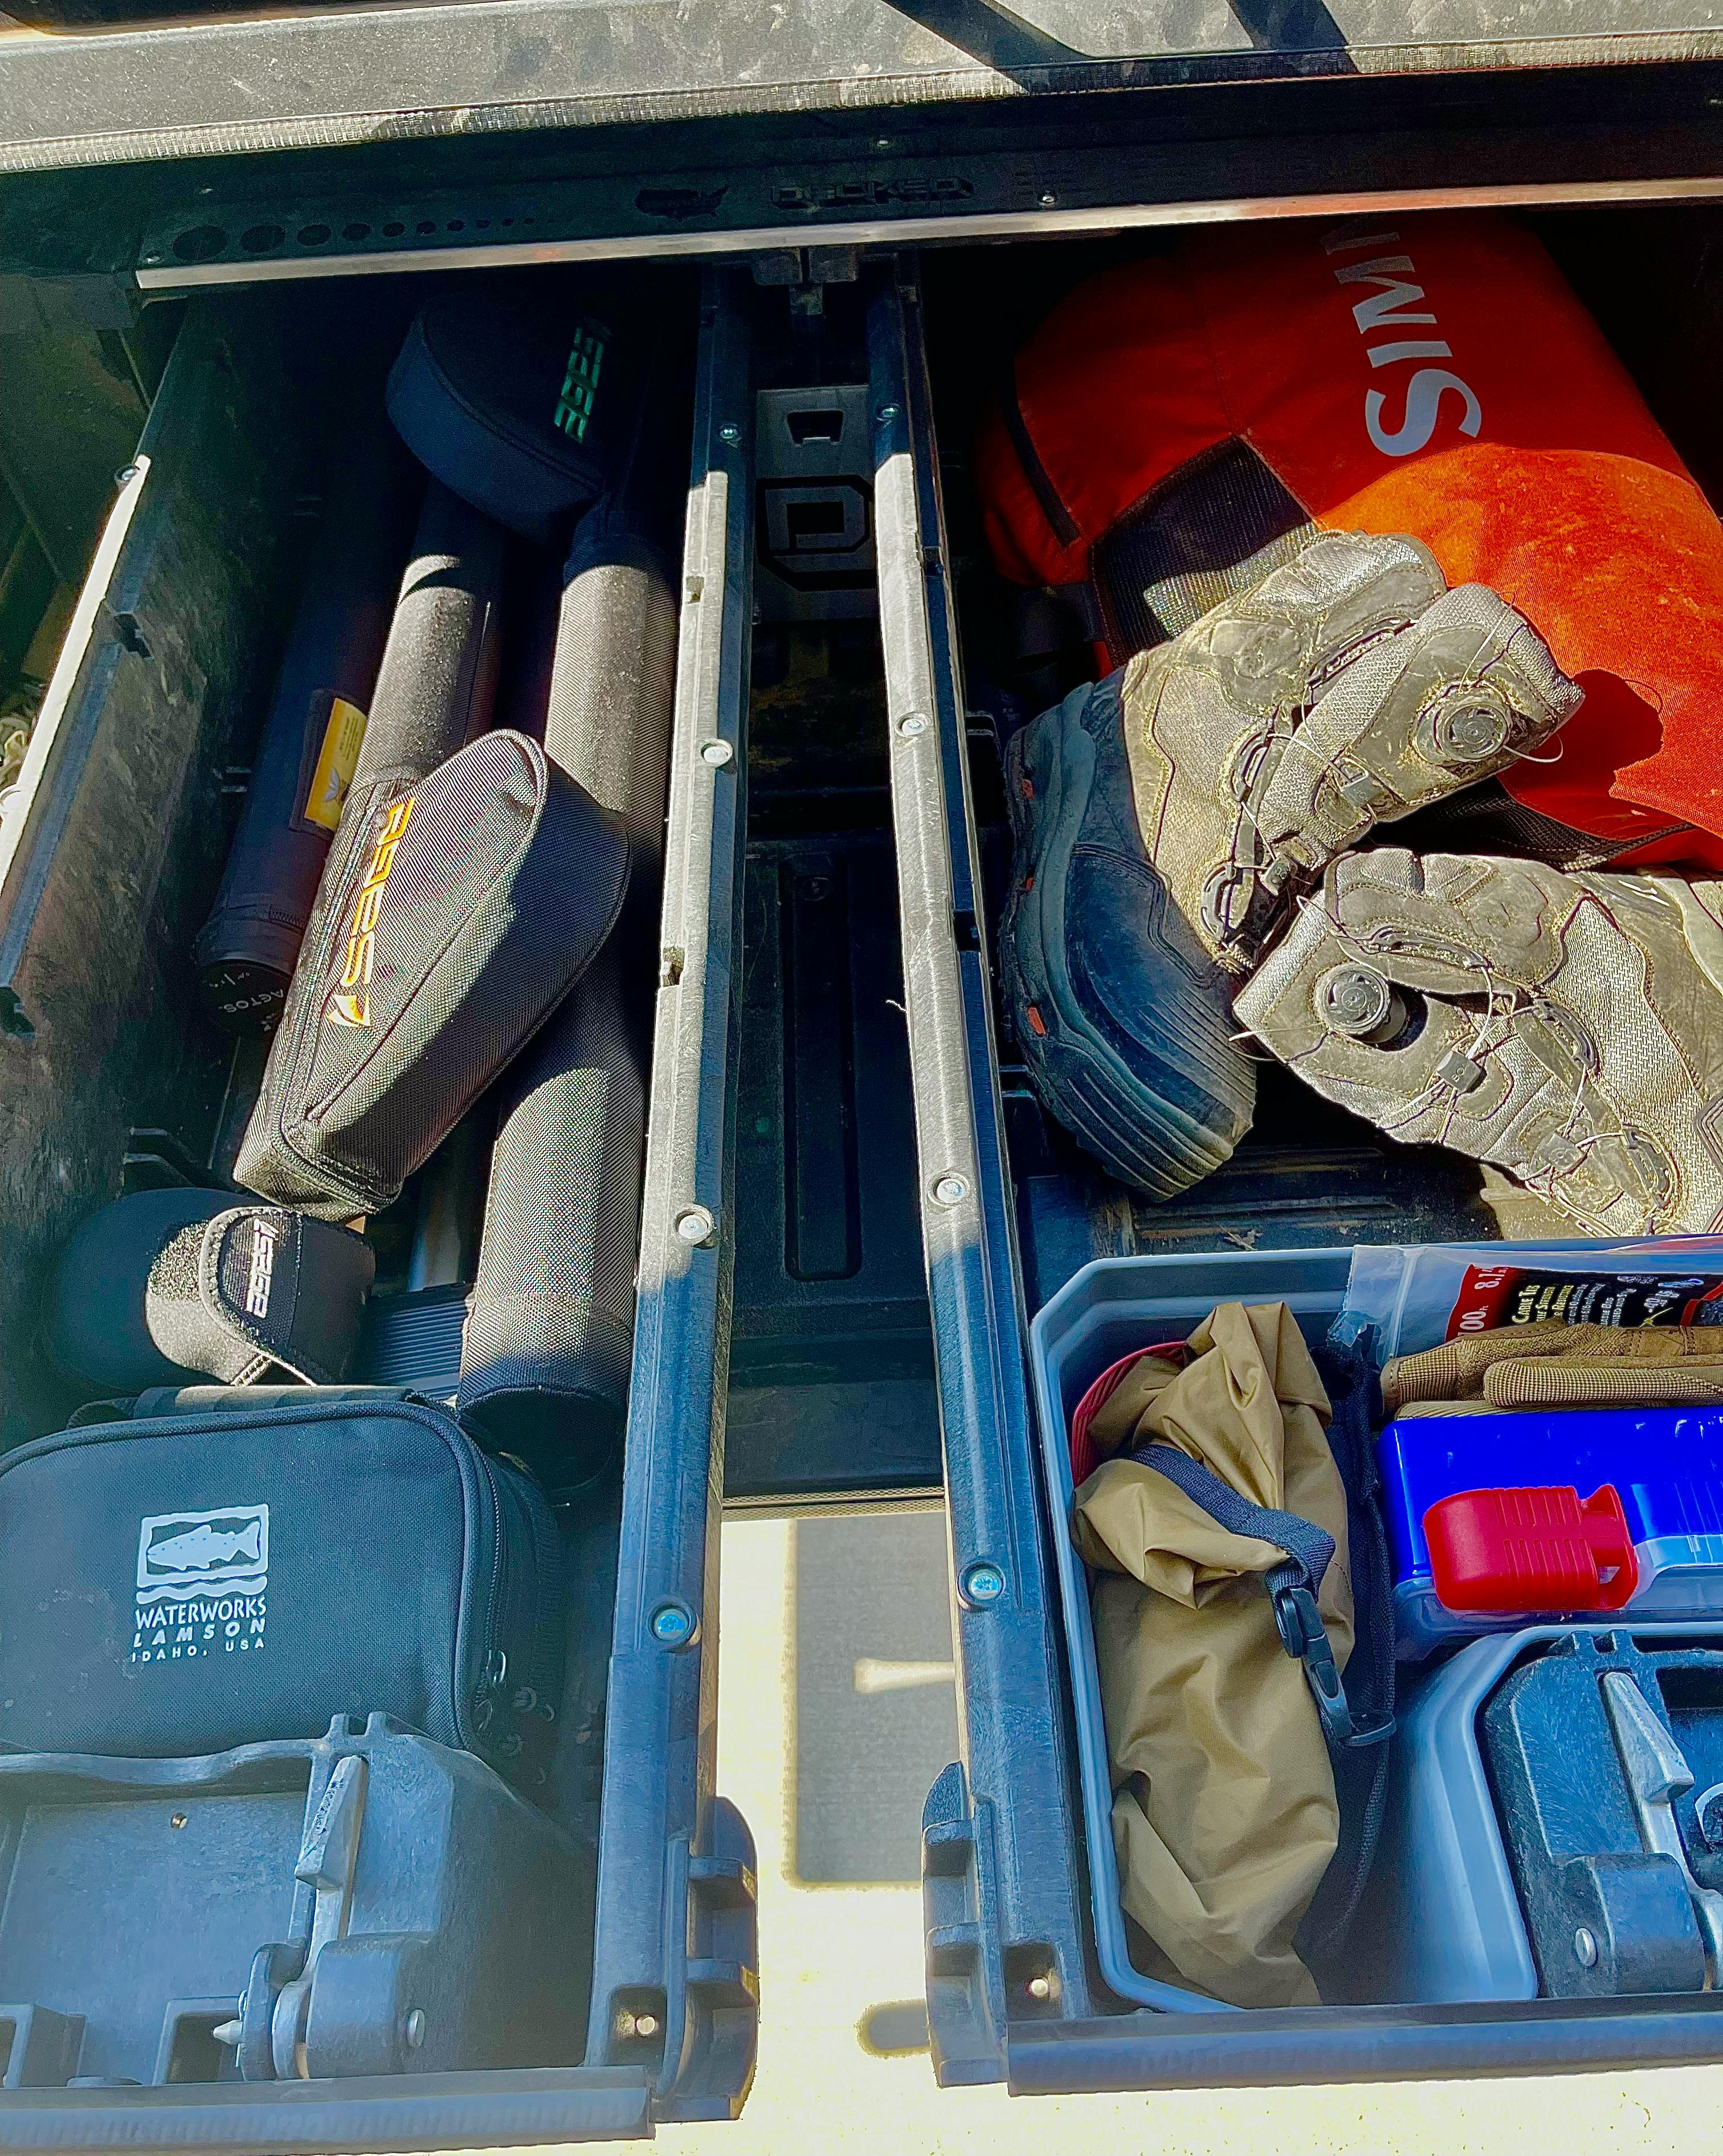 Some various fishing gear lies in a drawer.